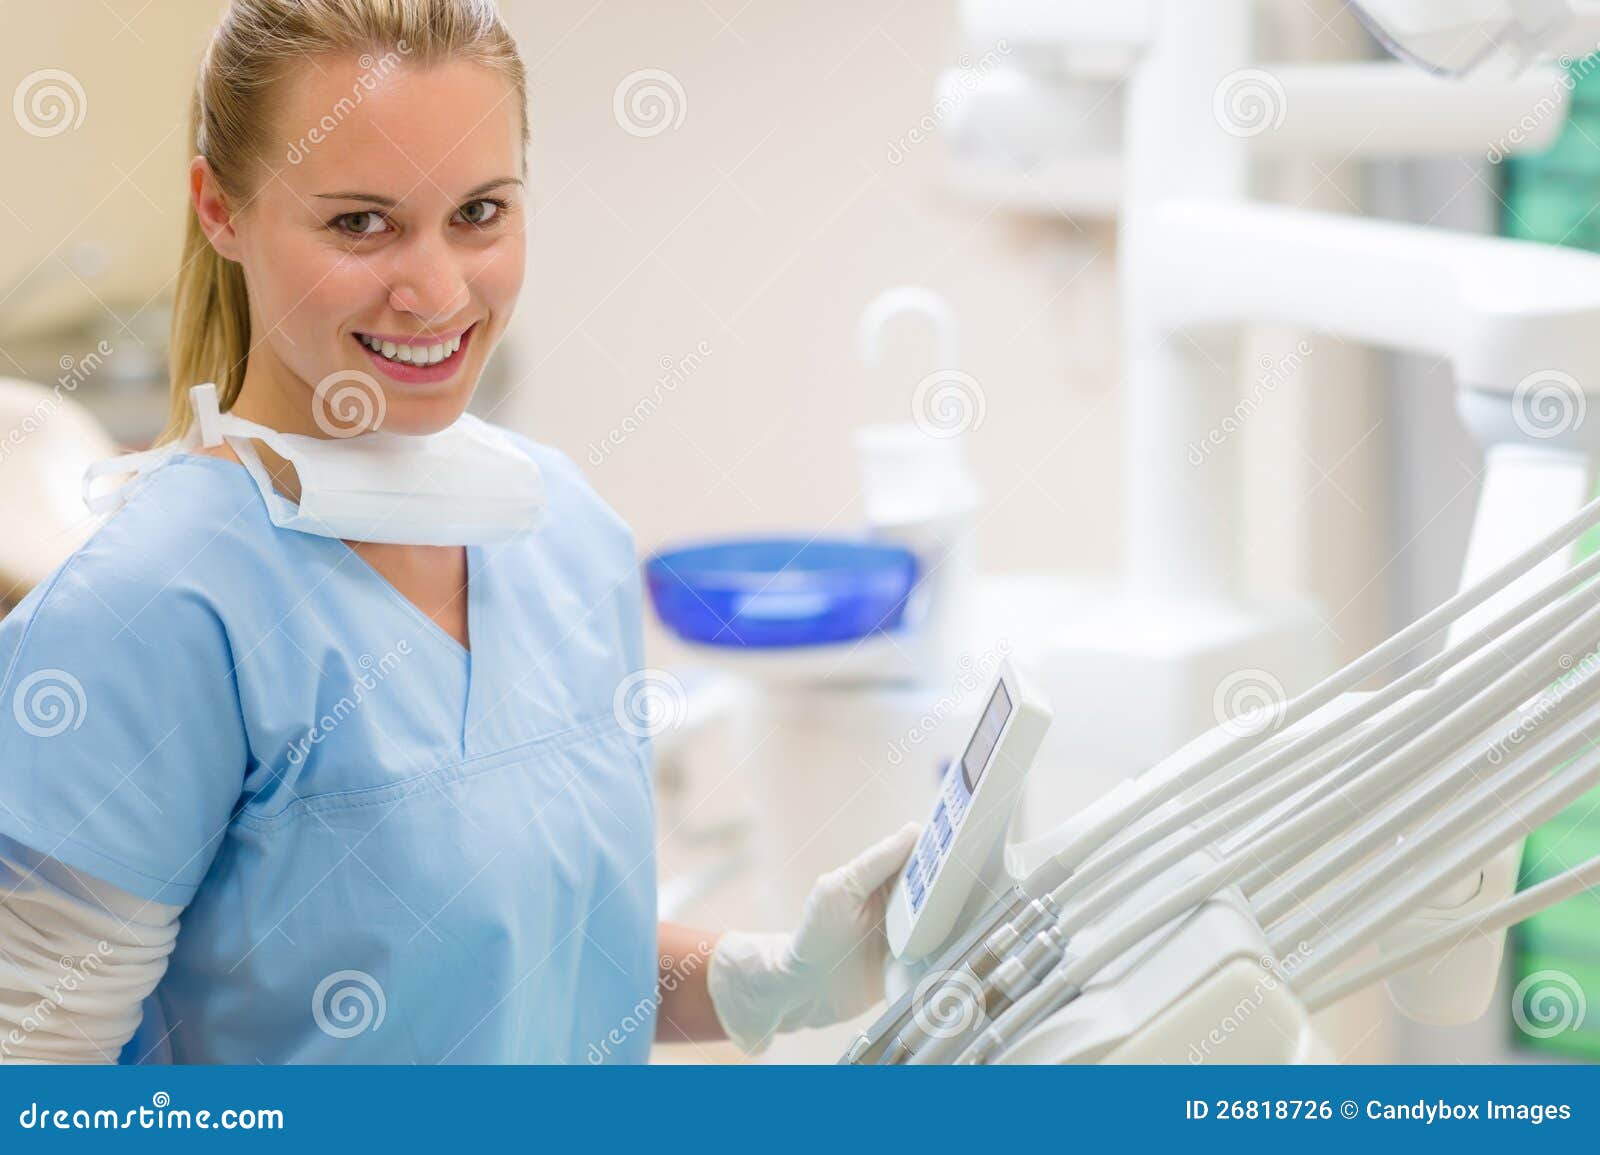 female dentist with dental equipment at surgery